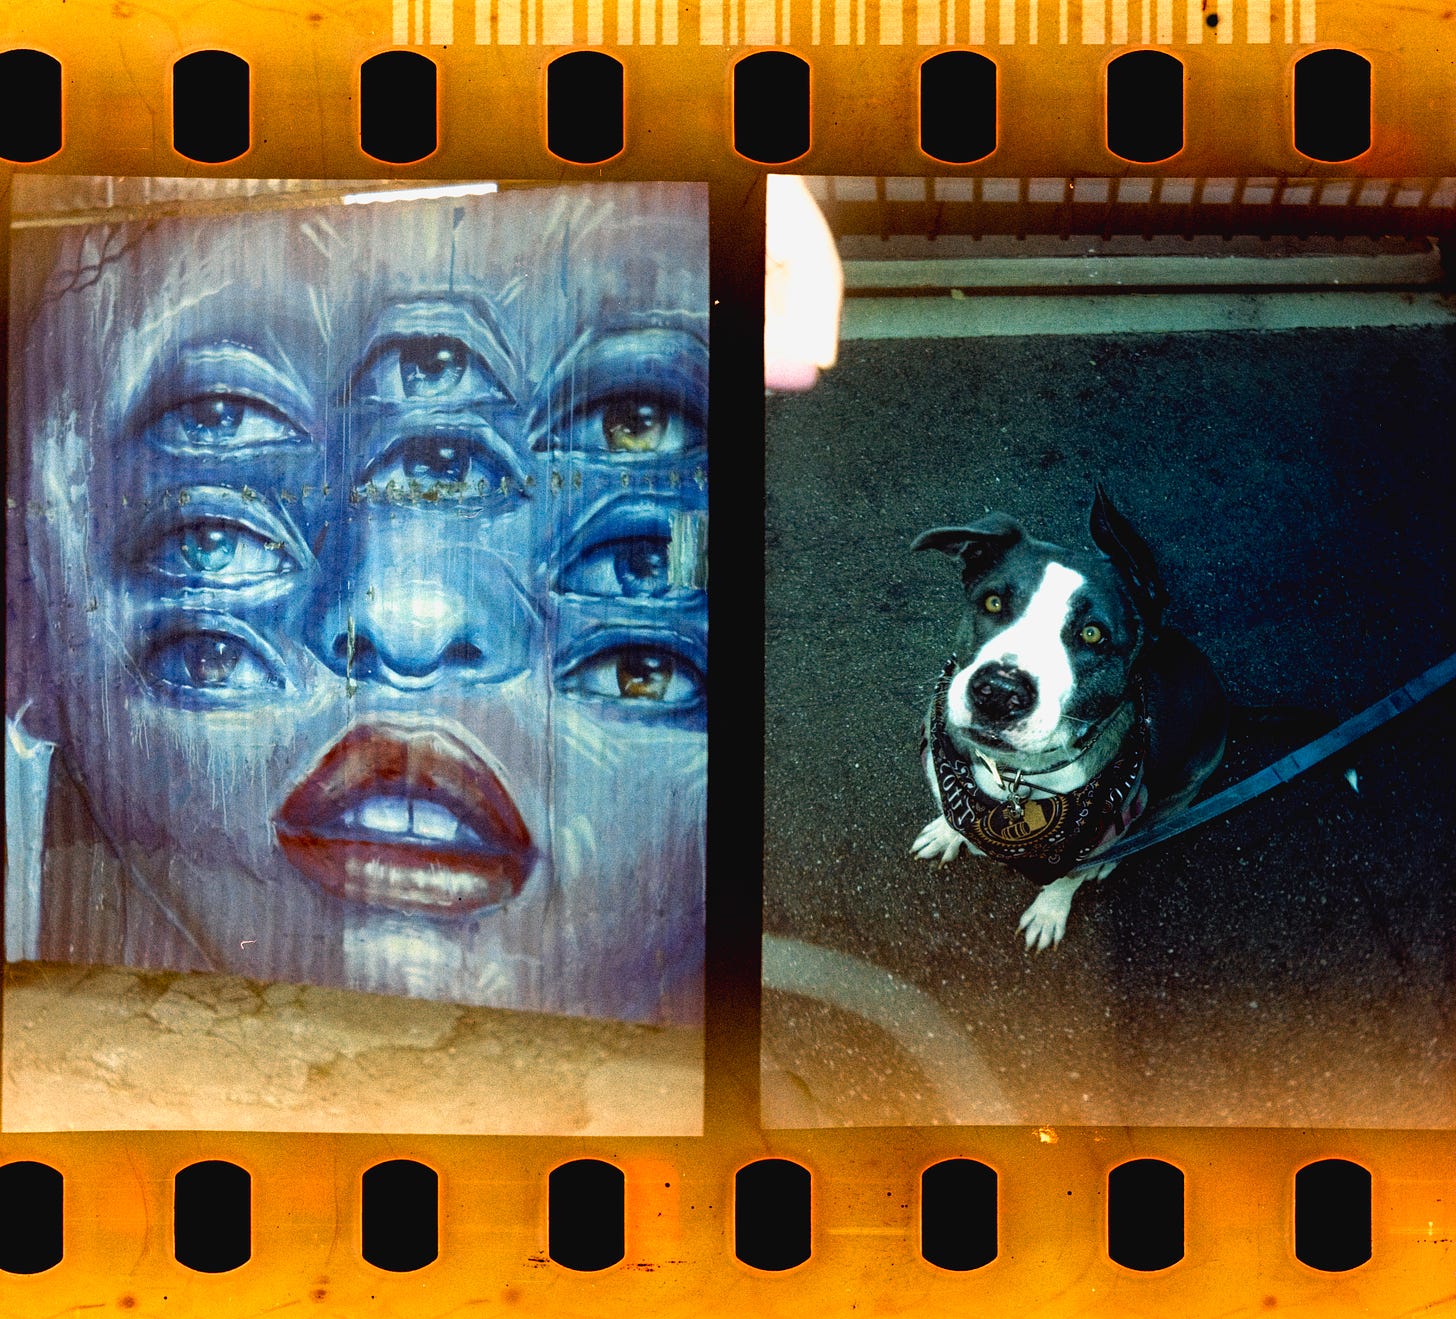 Image on right features a portrait of a person with eight eyes and red lipstick. Image on left is of an adorable pit bull making striking eye contact.